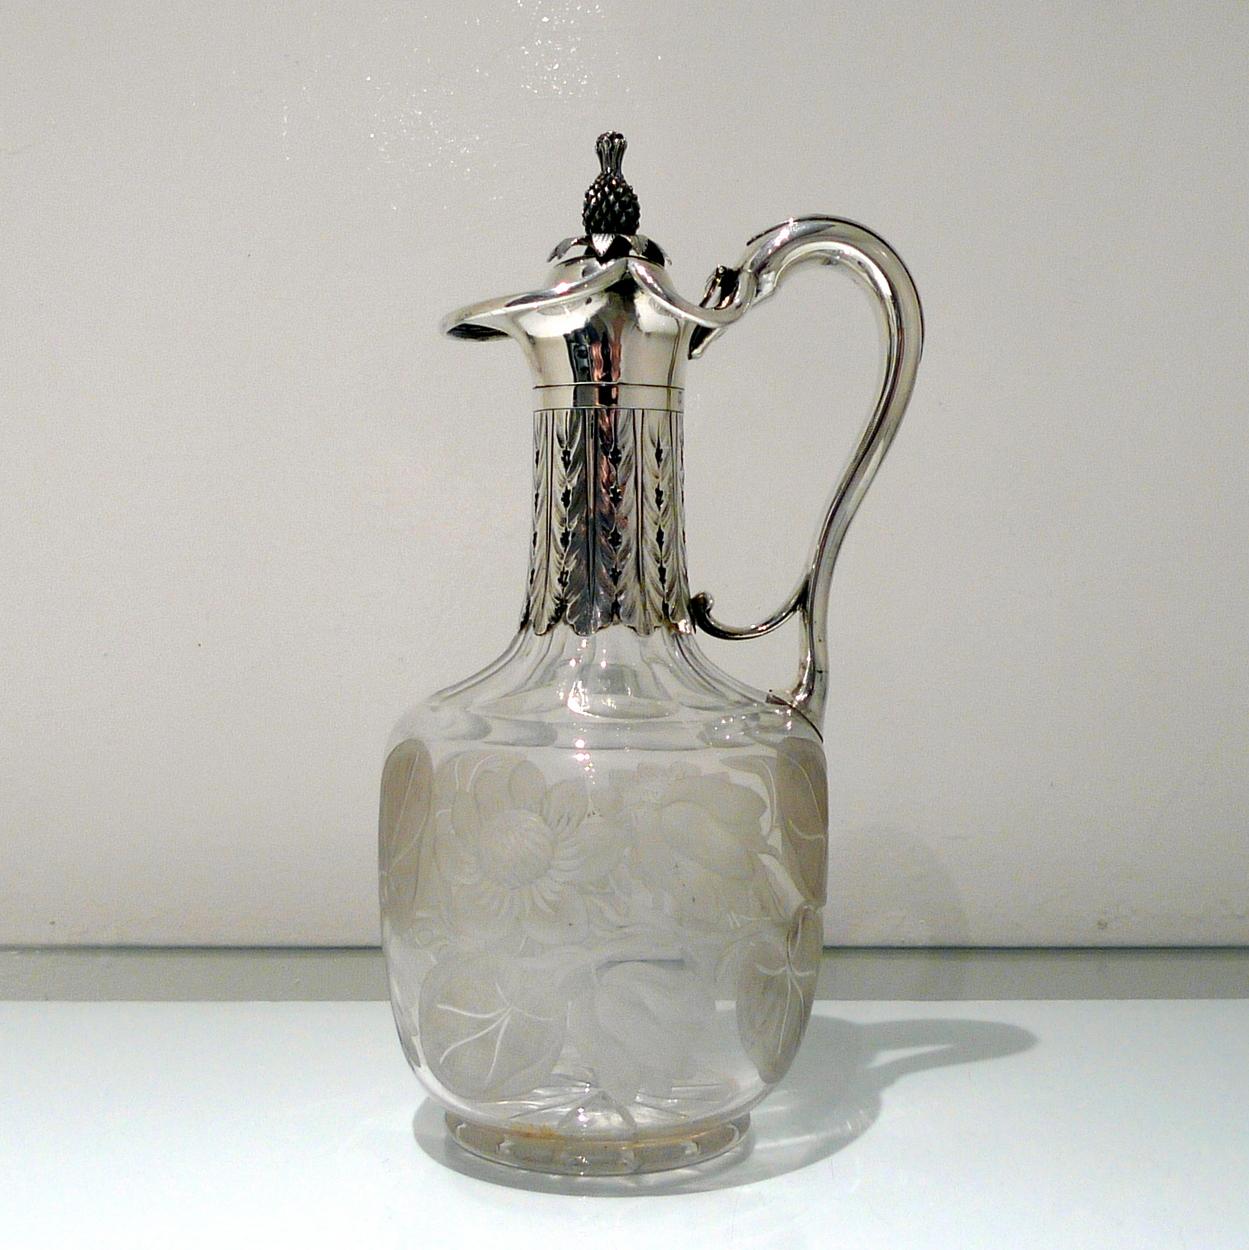 An unusual Victorian silver claret jug decorated with an ornate silver mount and a lower floral engraved crystal bowl. The lid is hinged and is mounted with a stylish silver “pineapple” finial.

 

Height: 30 inches/12 inches

Length: 6